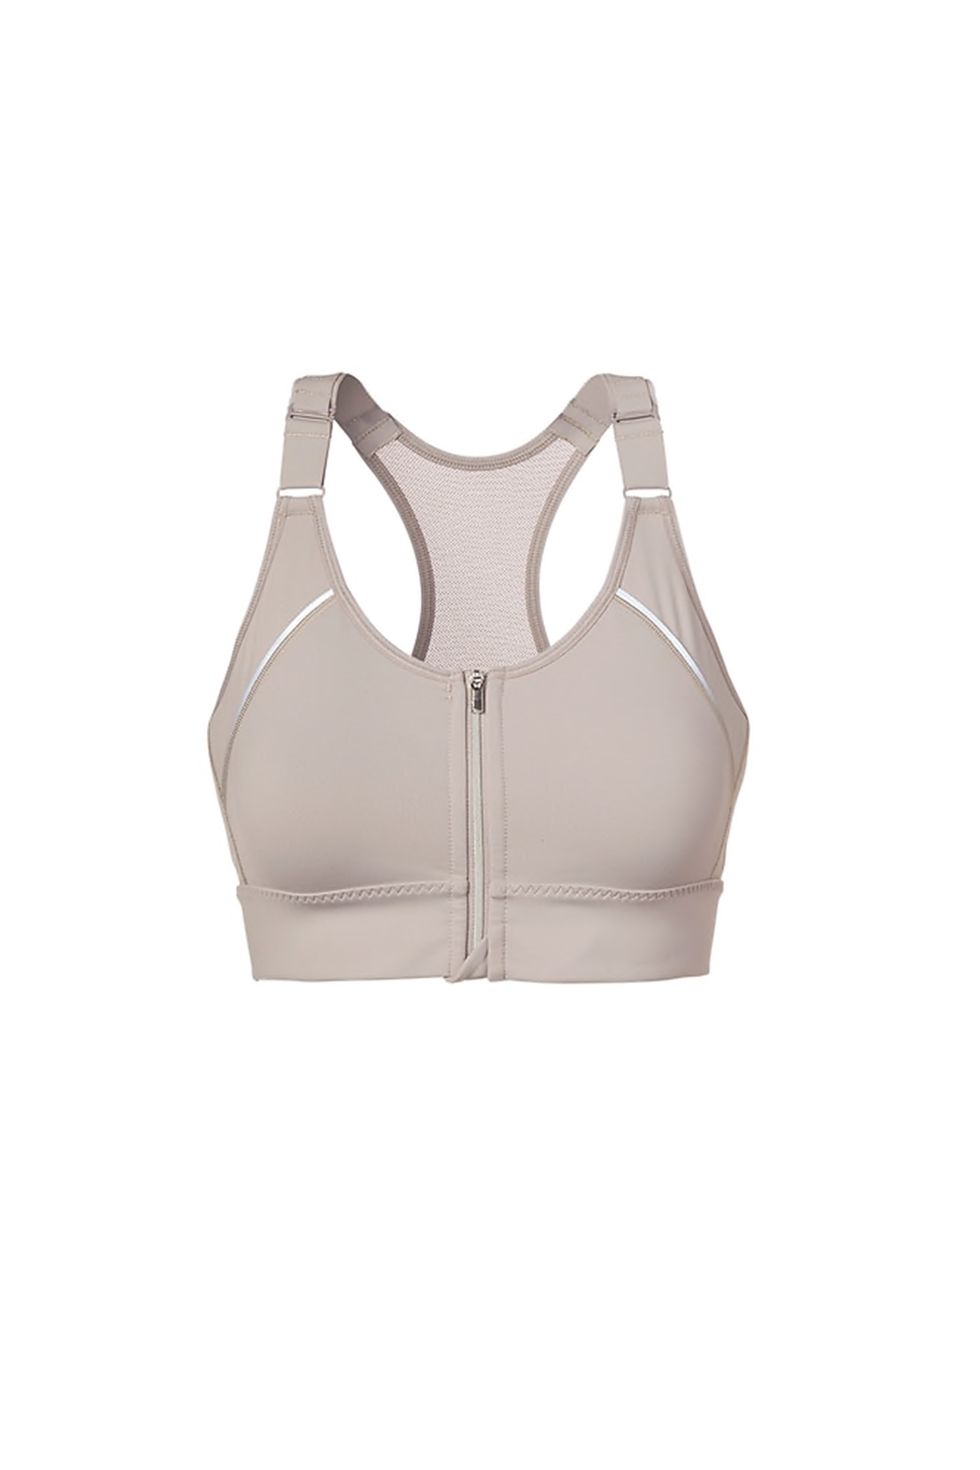 Athleta Created Two New Sports Bras for Breast Cancer Awareness